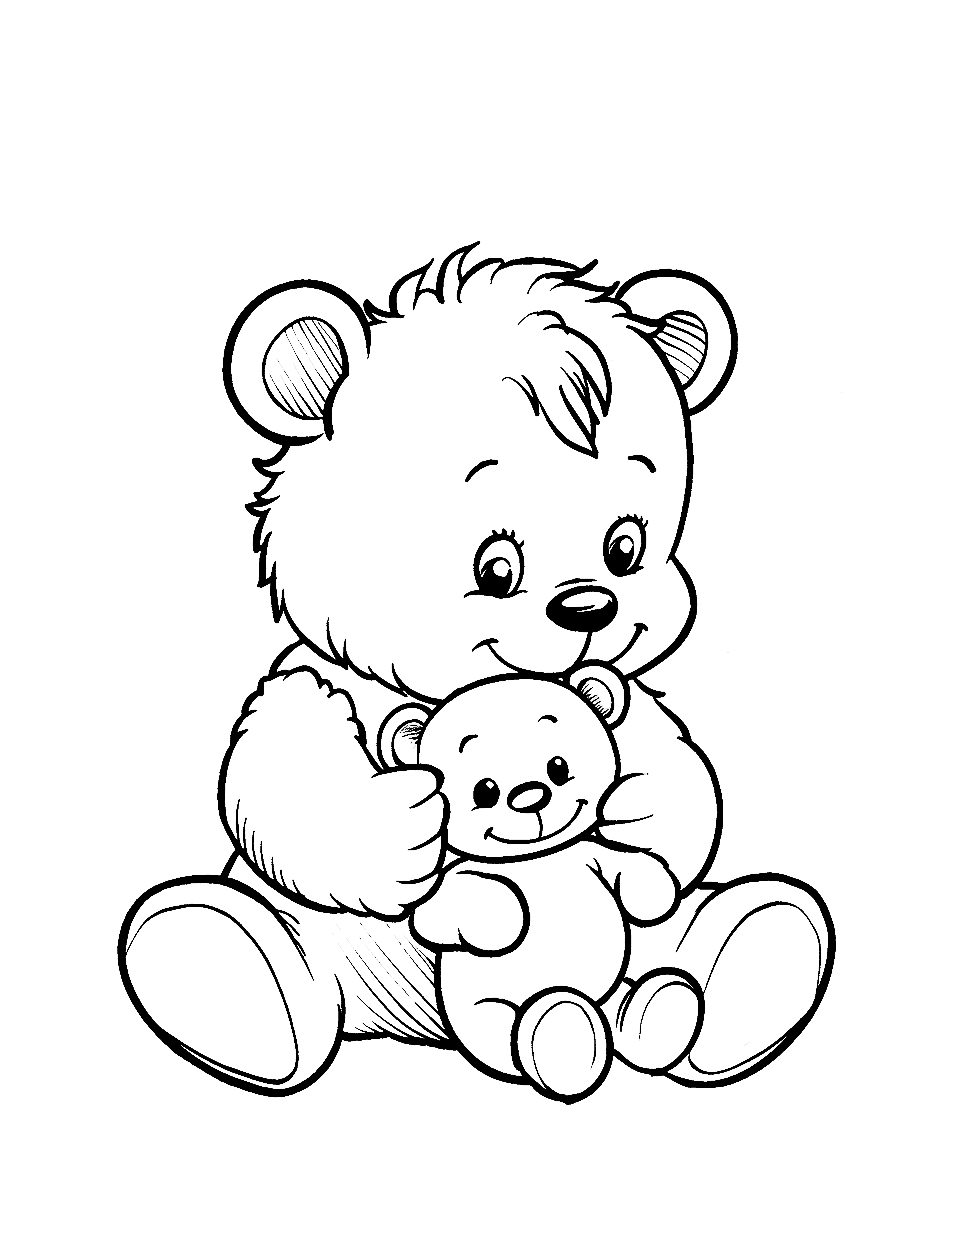 Two Teddies Coloring Page - A teddy bear holding a smaller teddy bear lovingly.